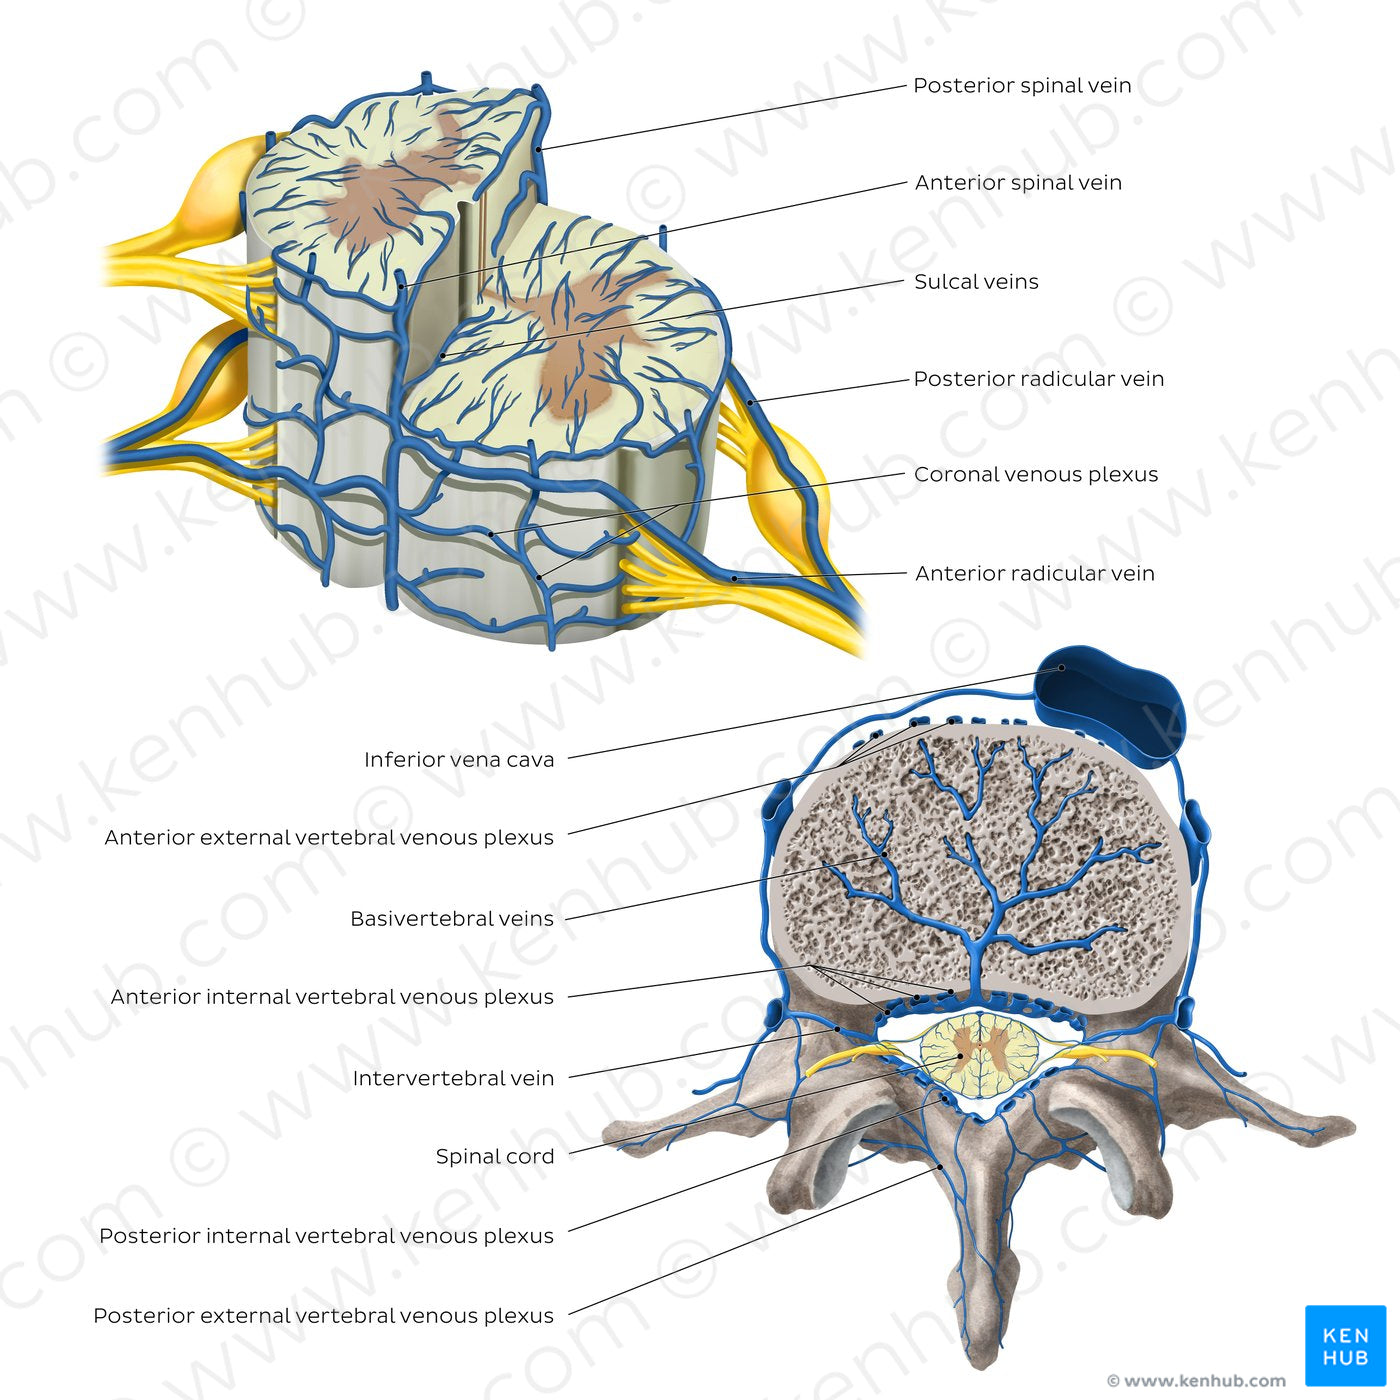 Veins of the spinal cord (English)